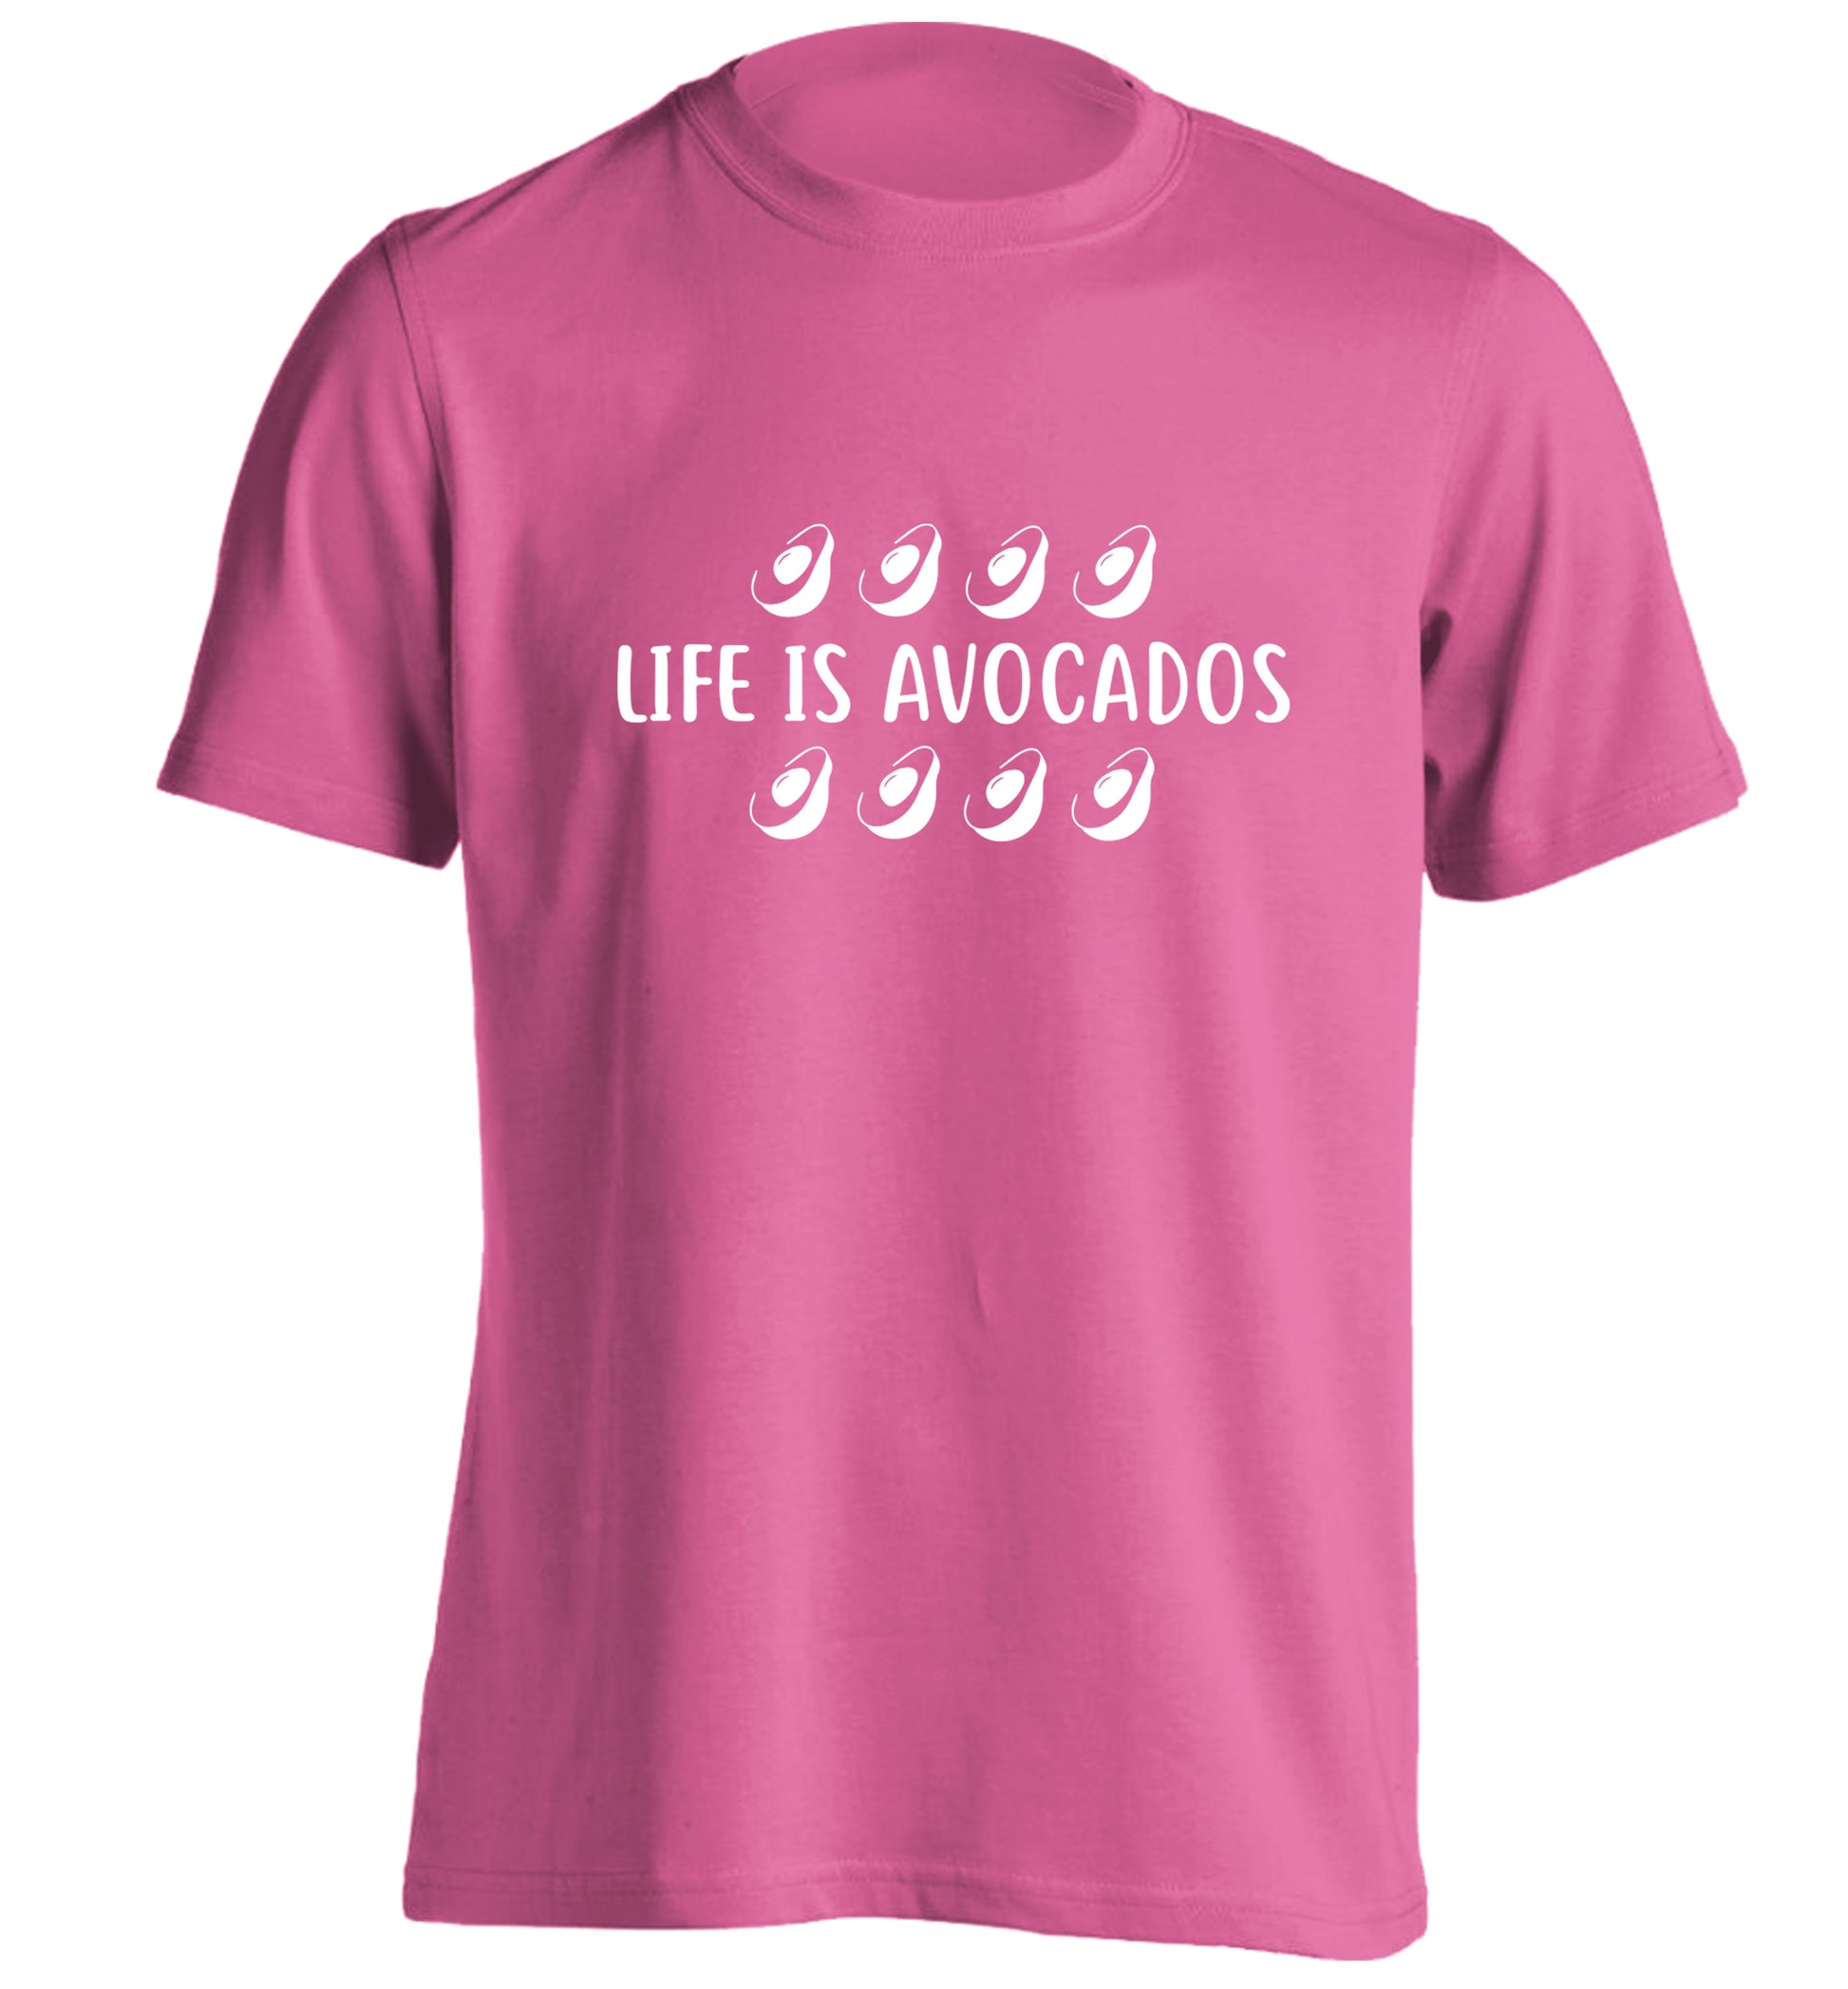 Life is avocados adults unisex pink Tshirt 2XL